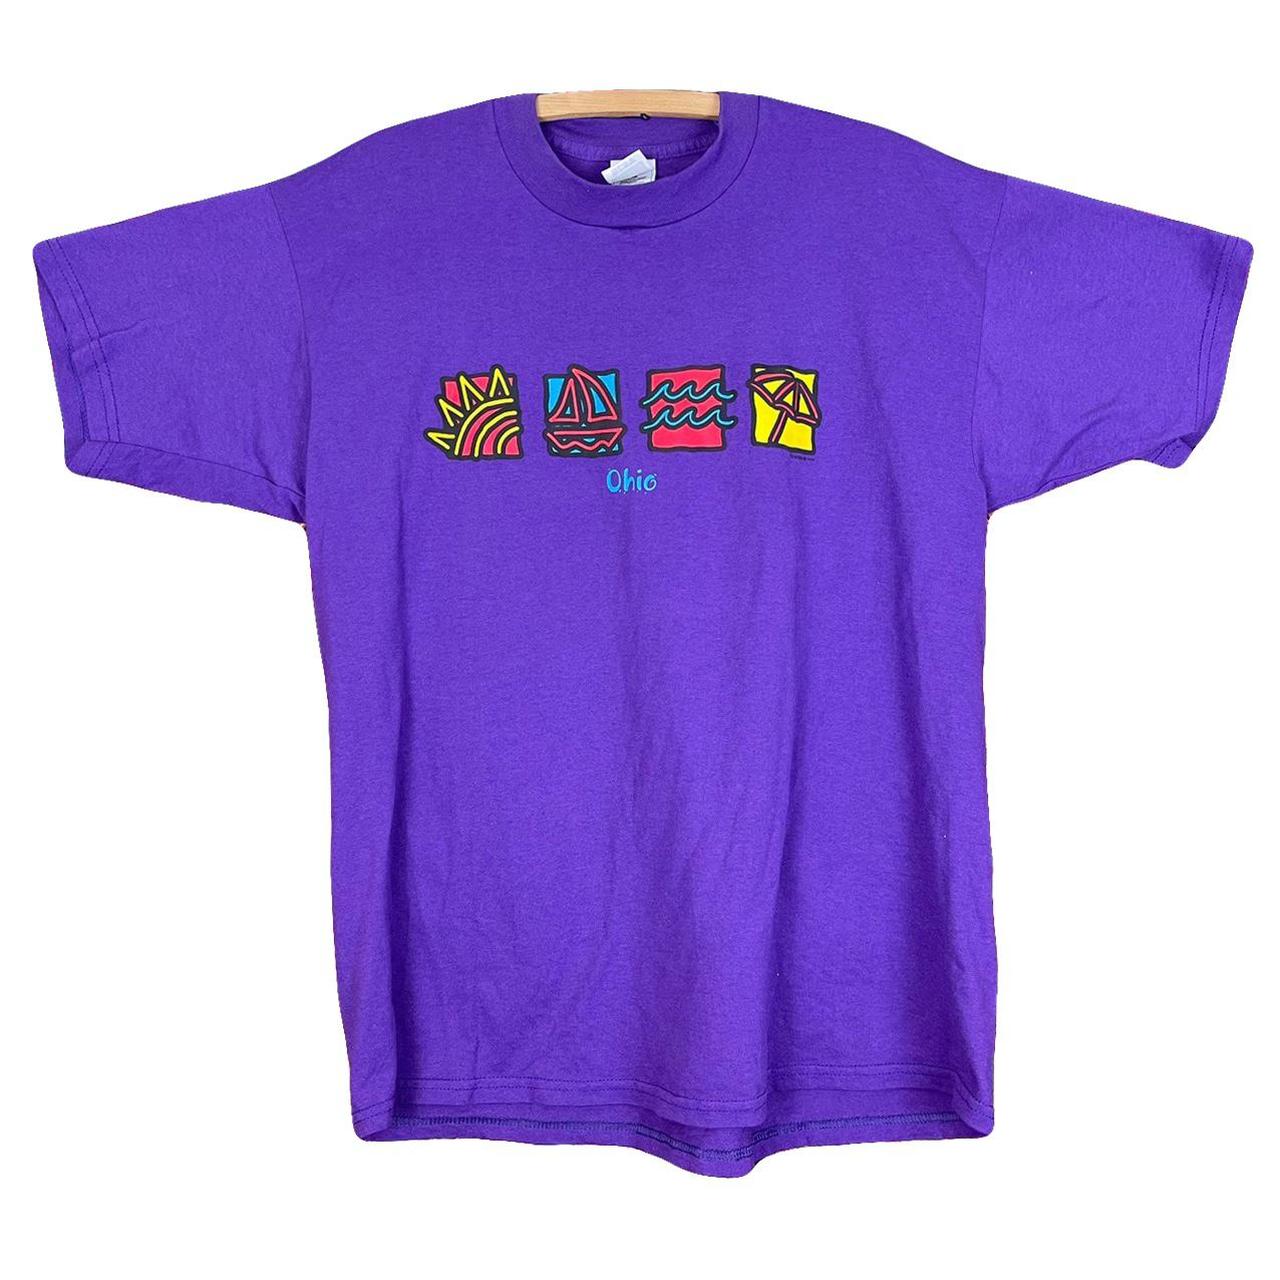 American Vintage Men's Purple and Yellow T-shirt